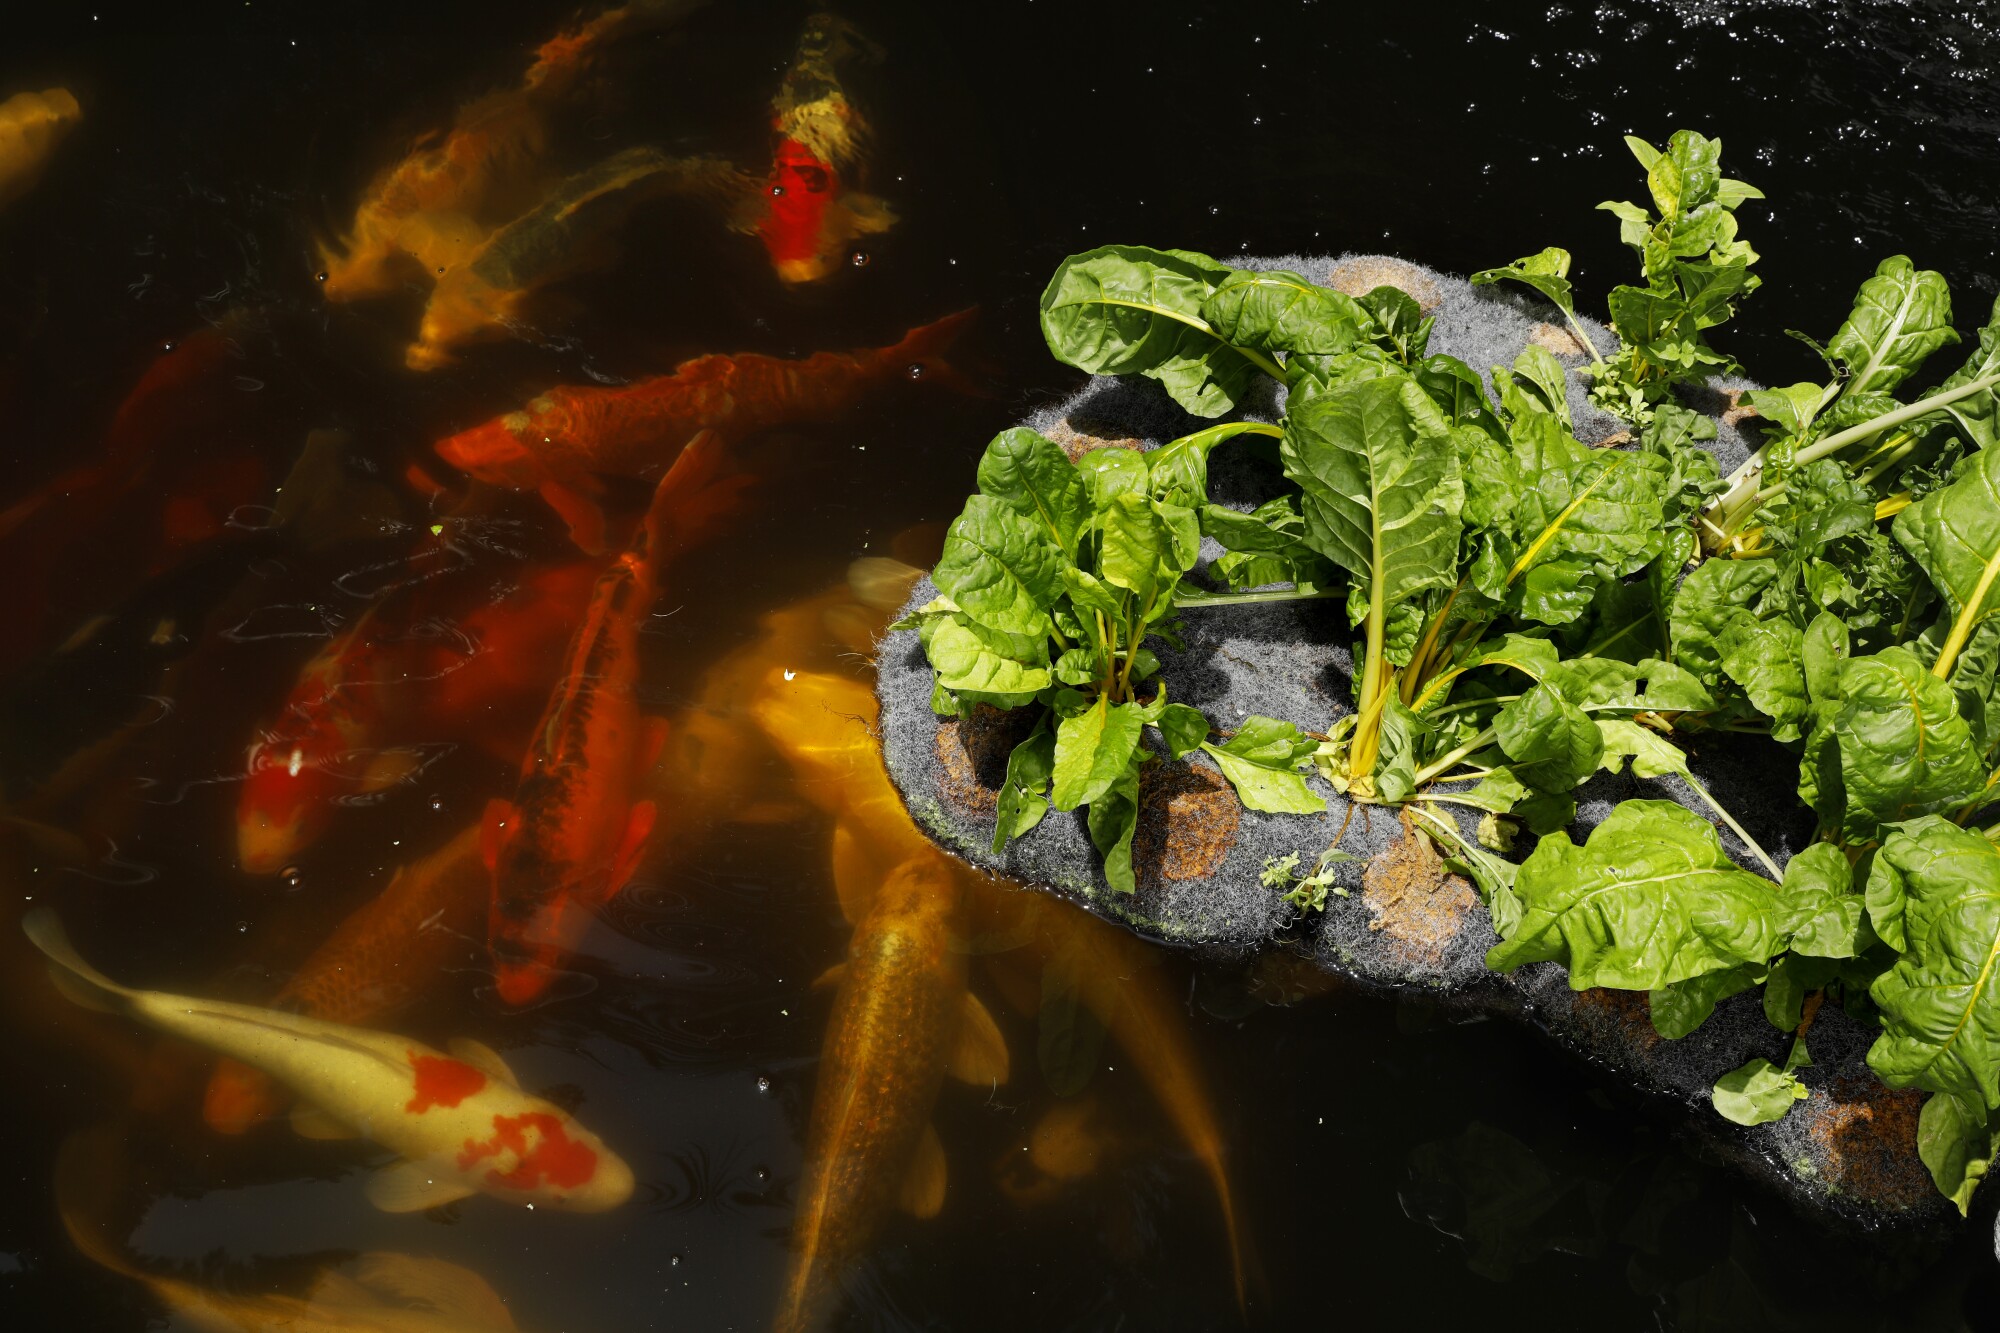 A small island of chard floats in a pond full of colorful koi fish.